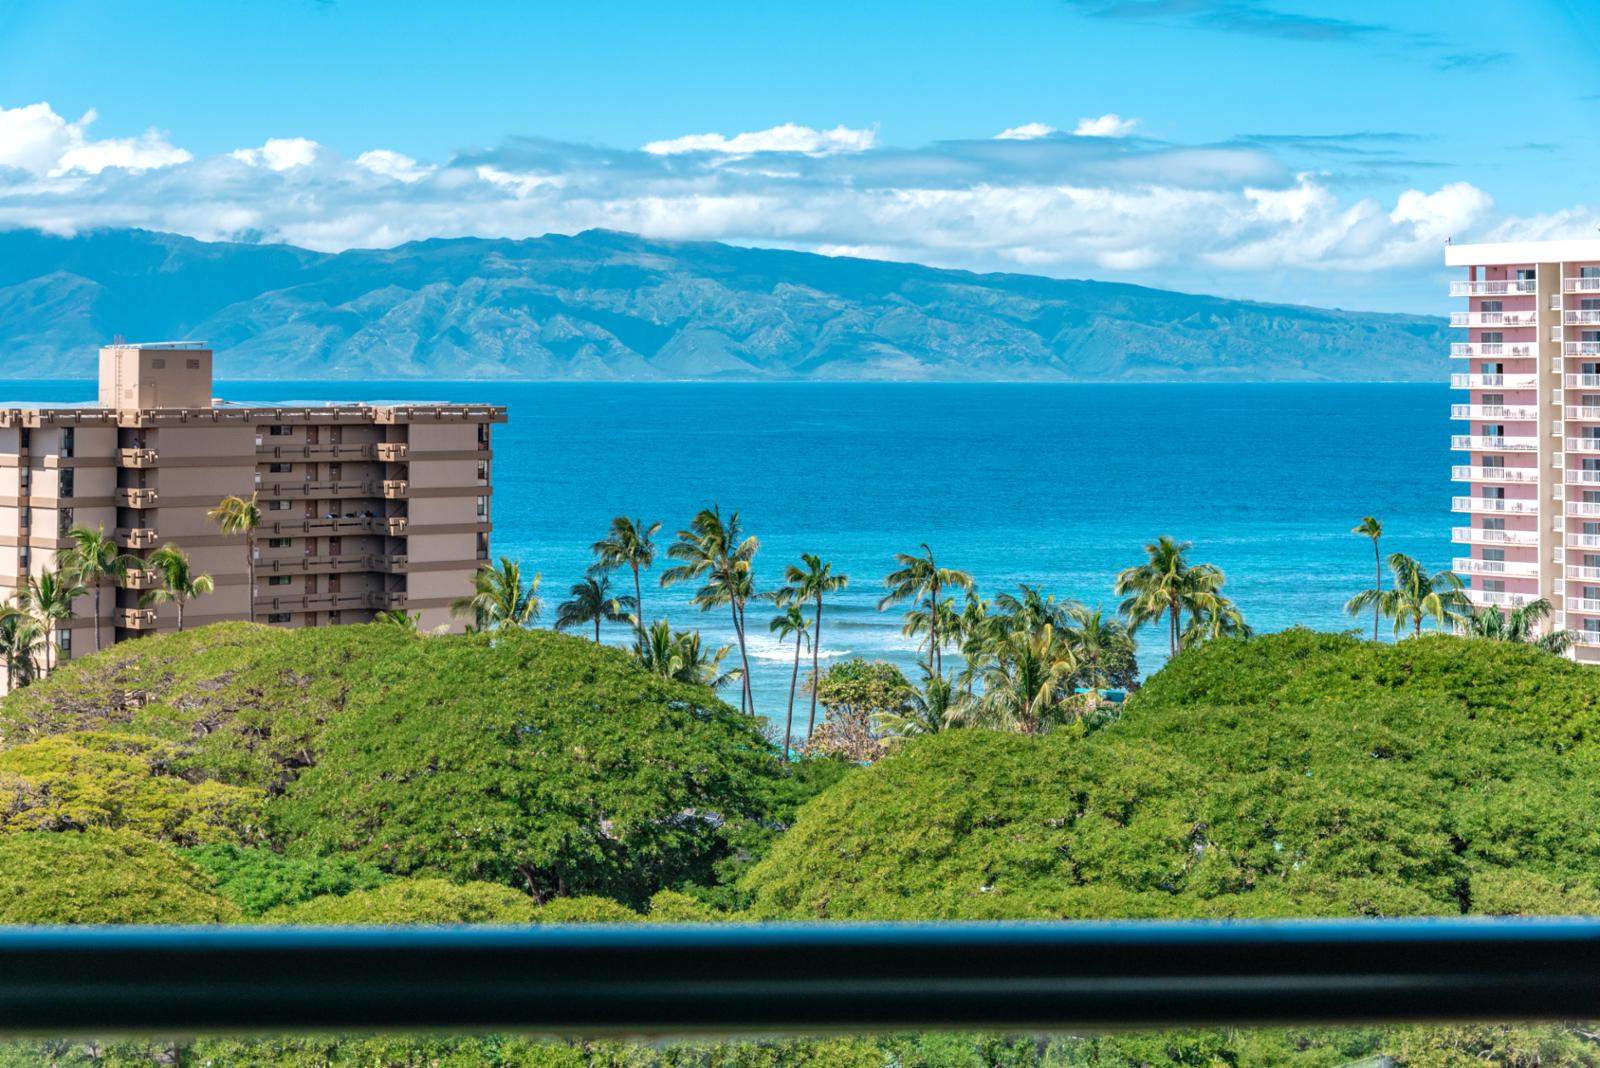 The island of Molokai, picture these jaw dropping views from your balcony